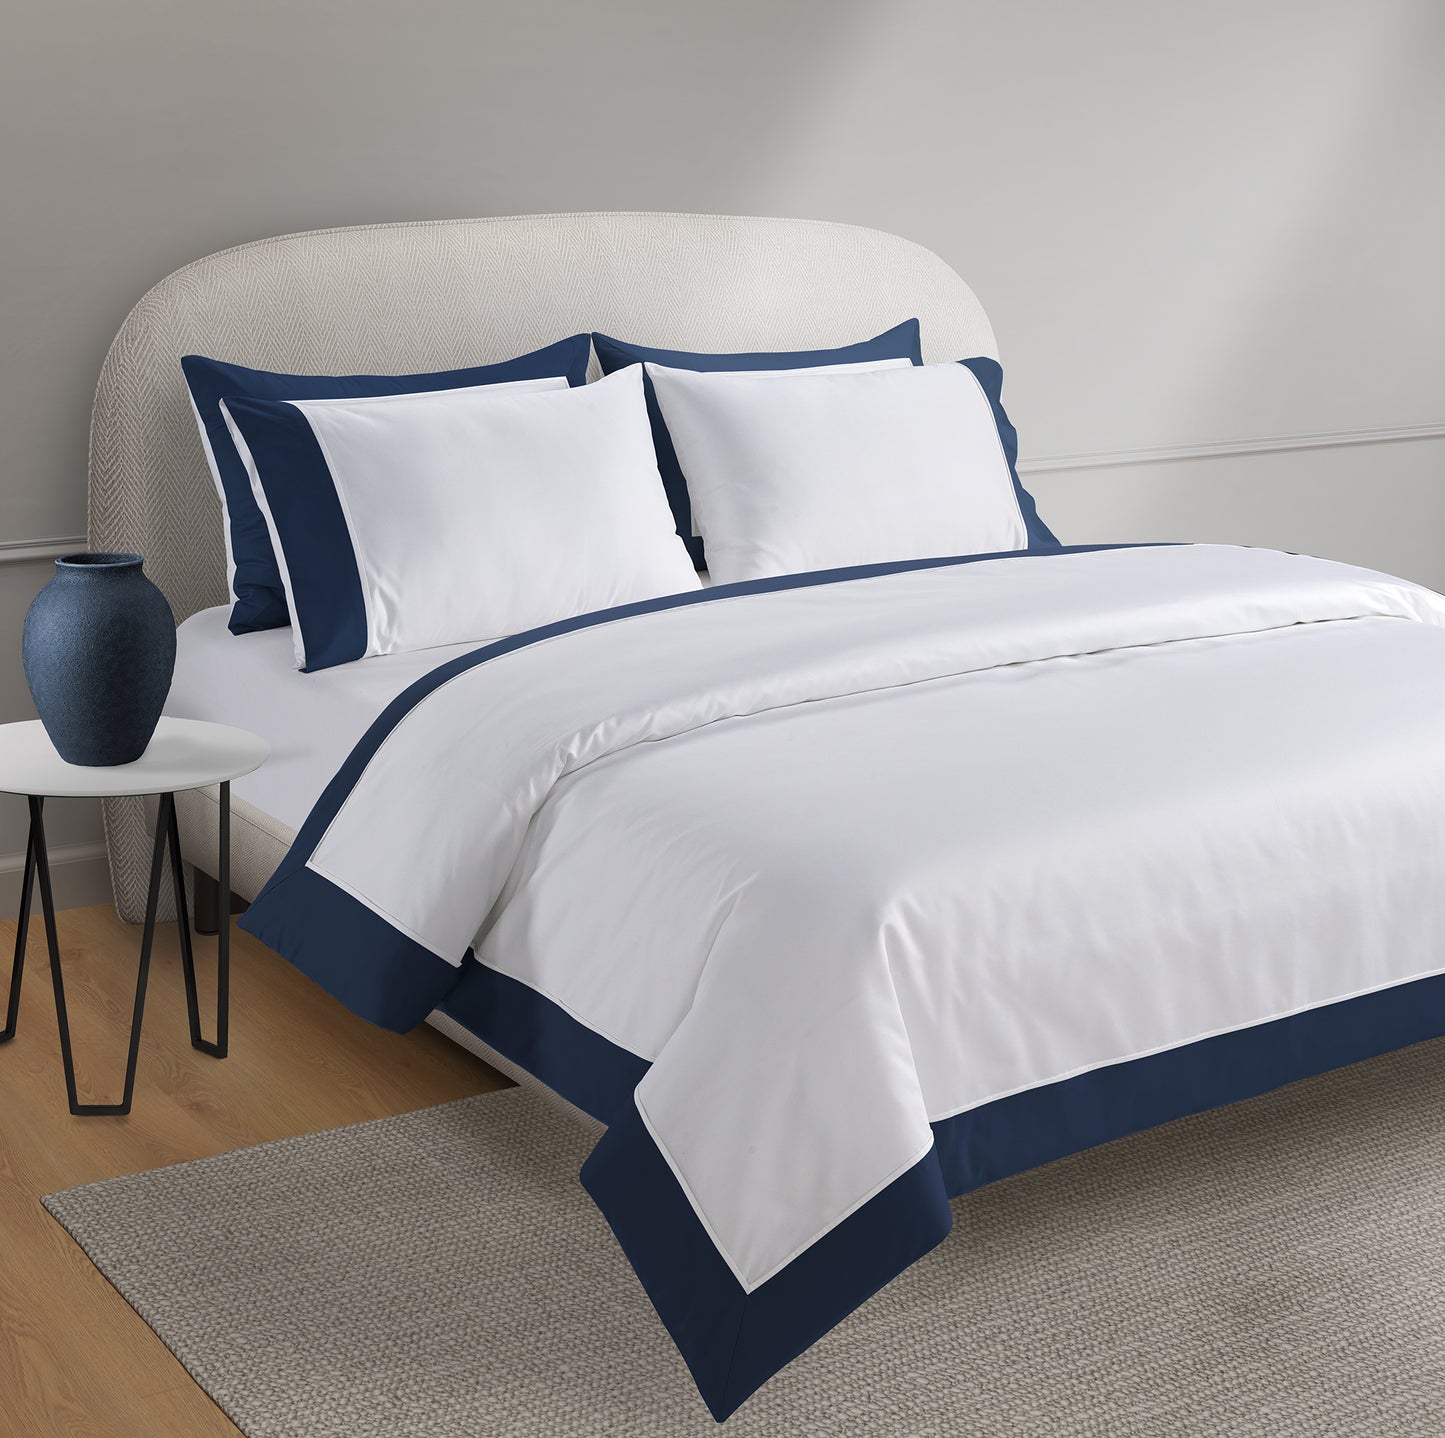 800 Thread Count Egyptian Cotton Windsor Lux Buttery Smooth Duvet Cover - Navy